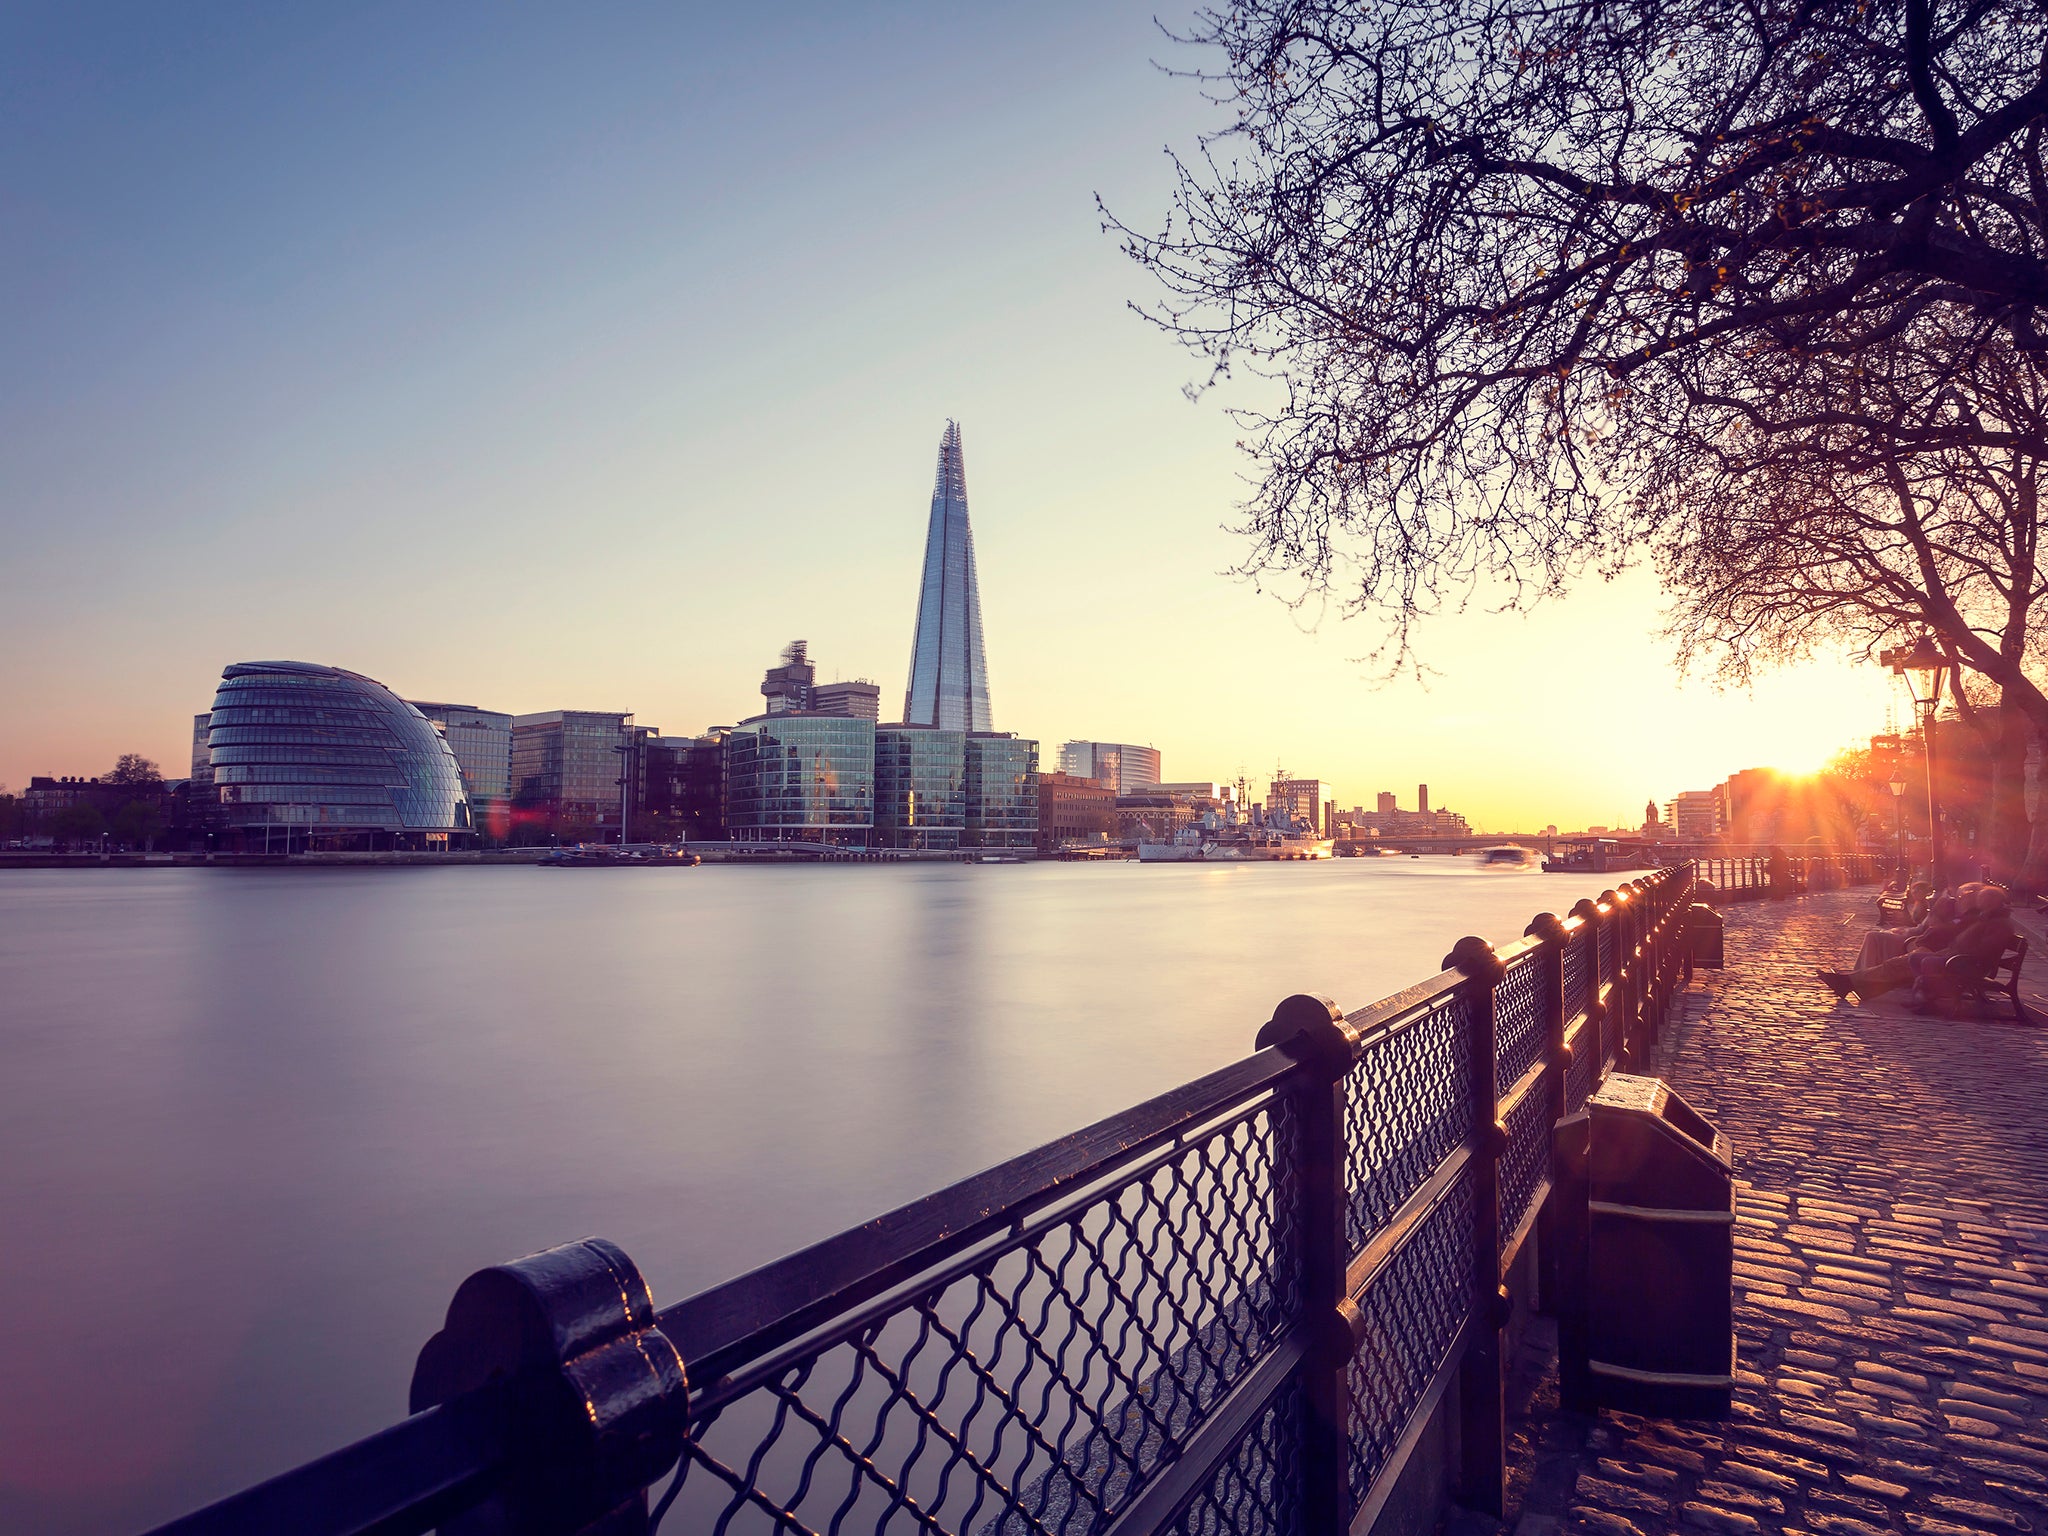 Many of London's best sights sit on the the banks of the Thames